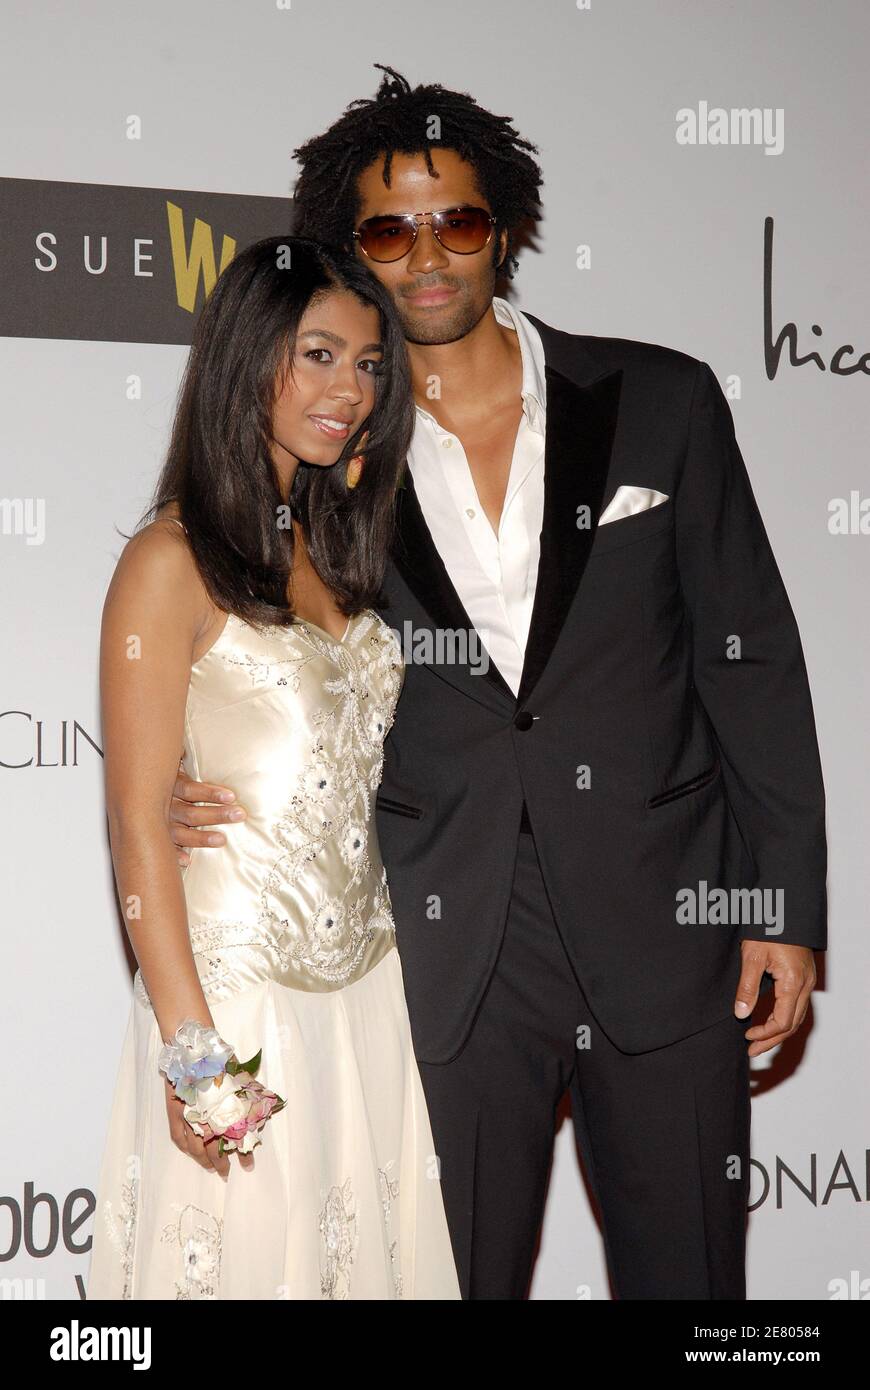 'Eric Benet and daughter India attend the first annual Planet Hope ''Class of Hope Prom 2007''. Planet Hope has created the prom initiative to help those in need fulfill their dream of attending the prom by raising funds and securing over 2,000 prom dresses and shoes to be distributed to students nation-wide. Los Angeles, April 21, 2007. Photo by Lionel Hahn/ABACAPRESS.COM' Stock Photo